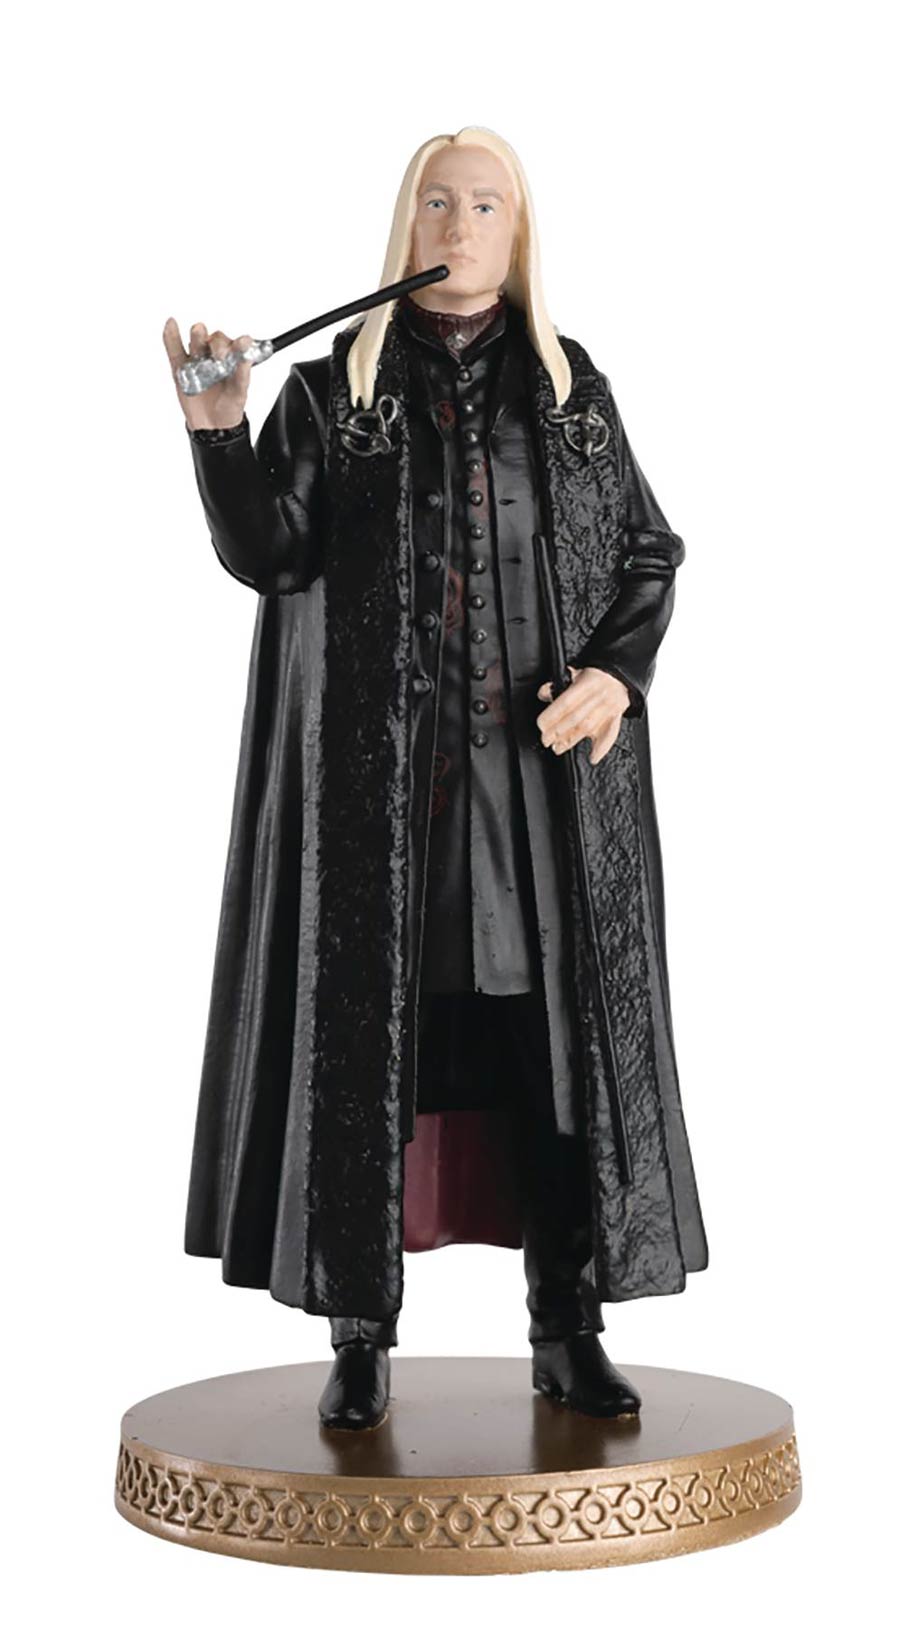 Wizarding World Figurine Collection - Lucius Malfoy